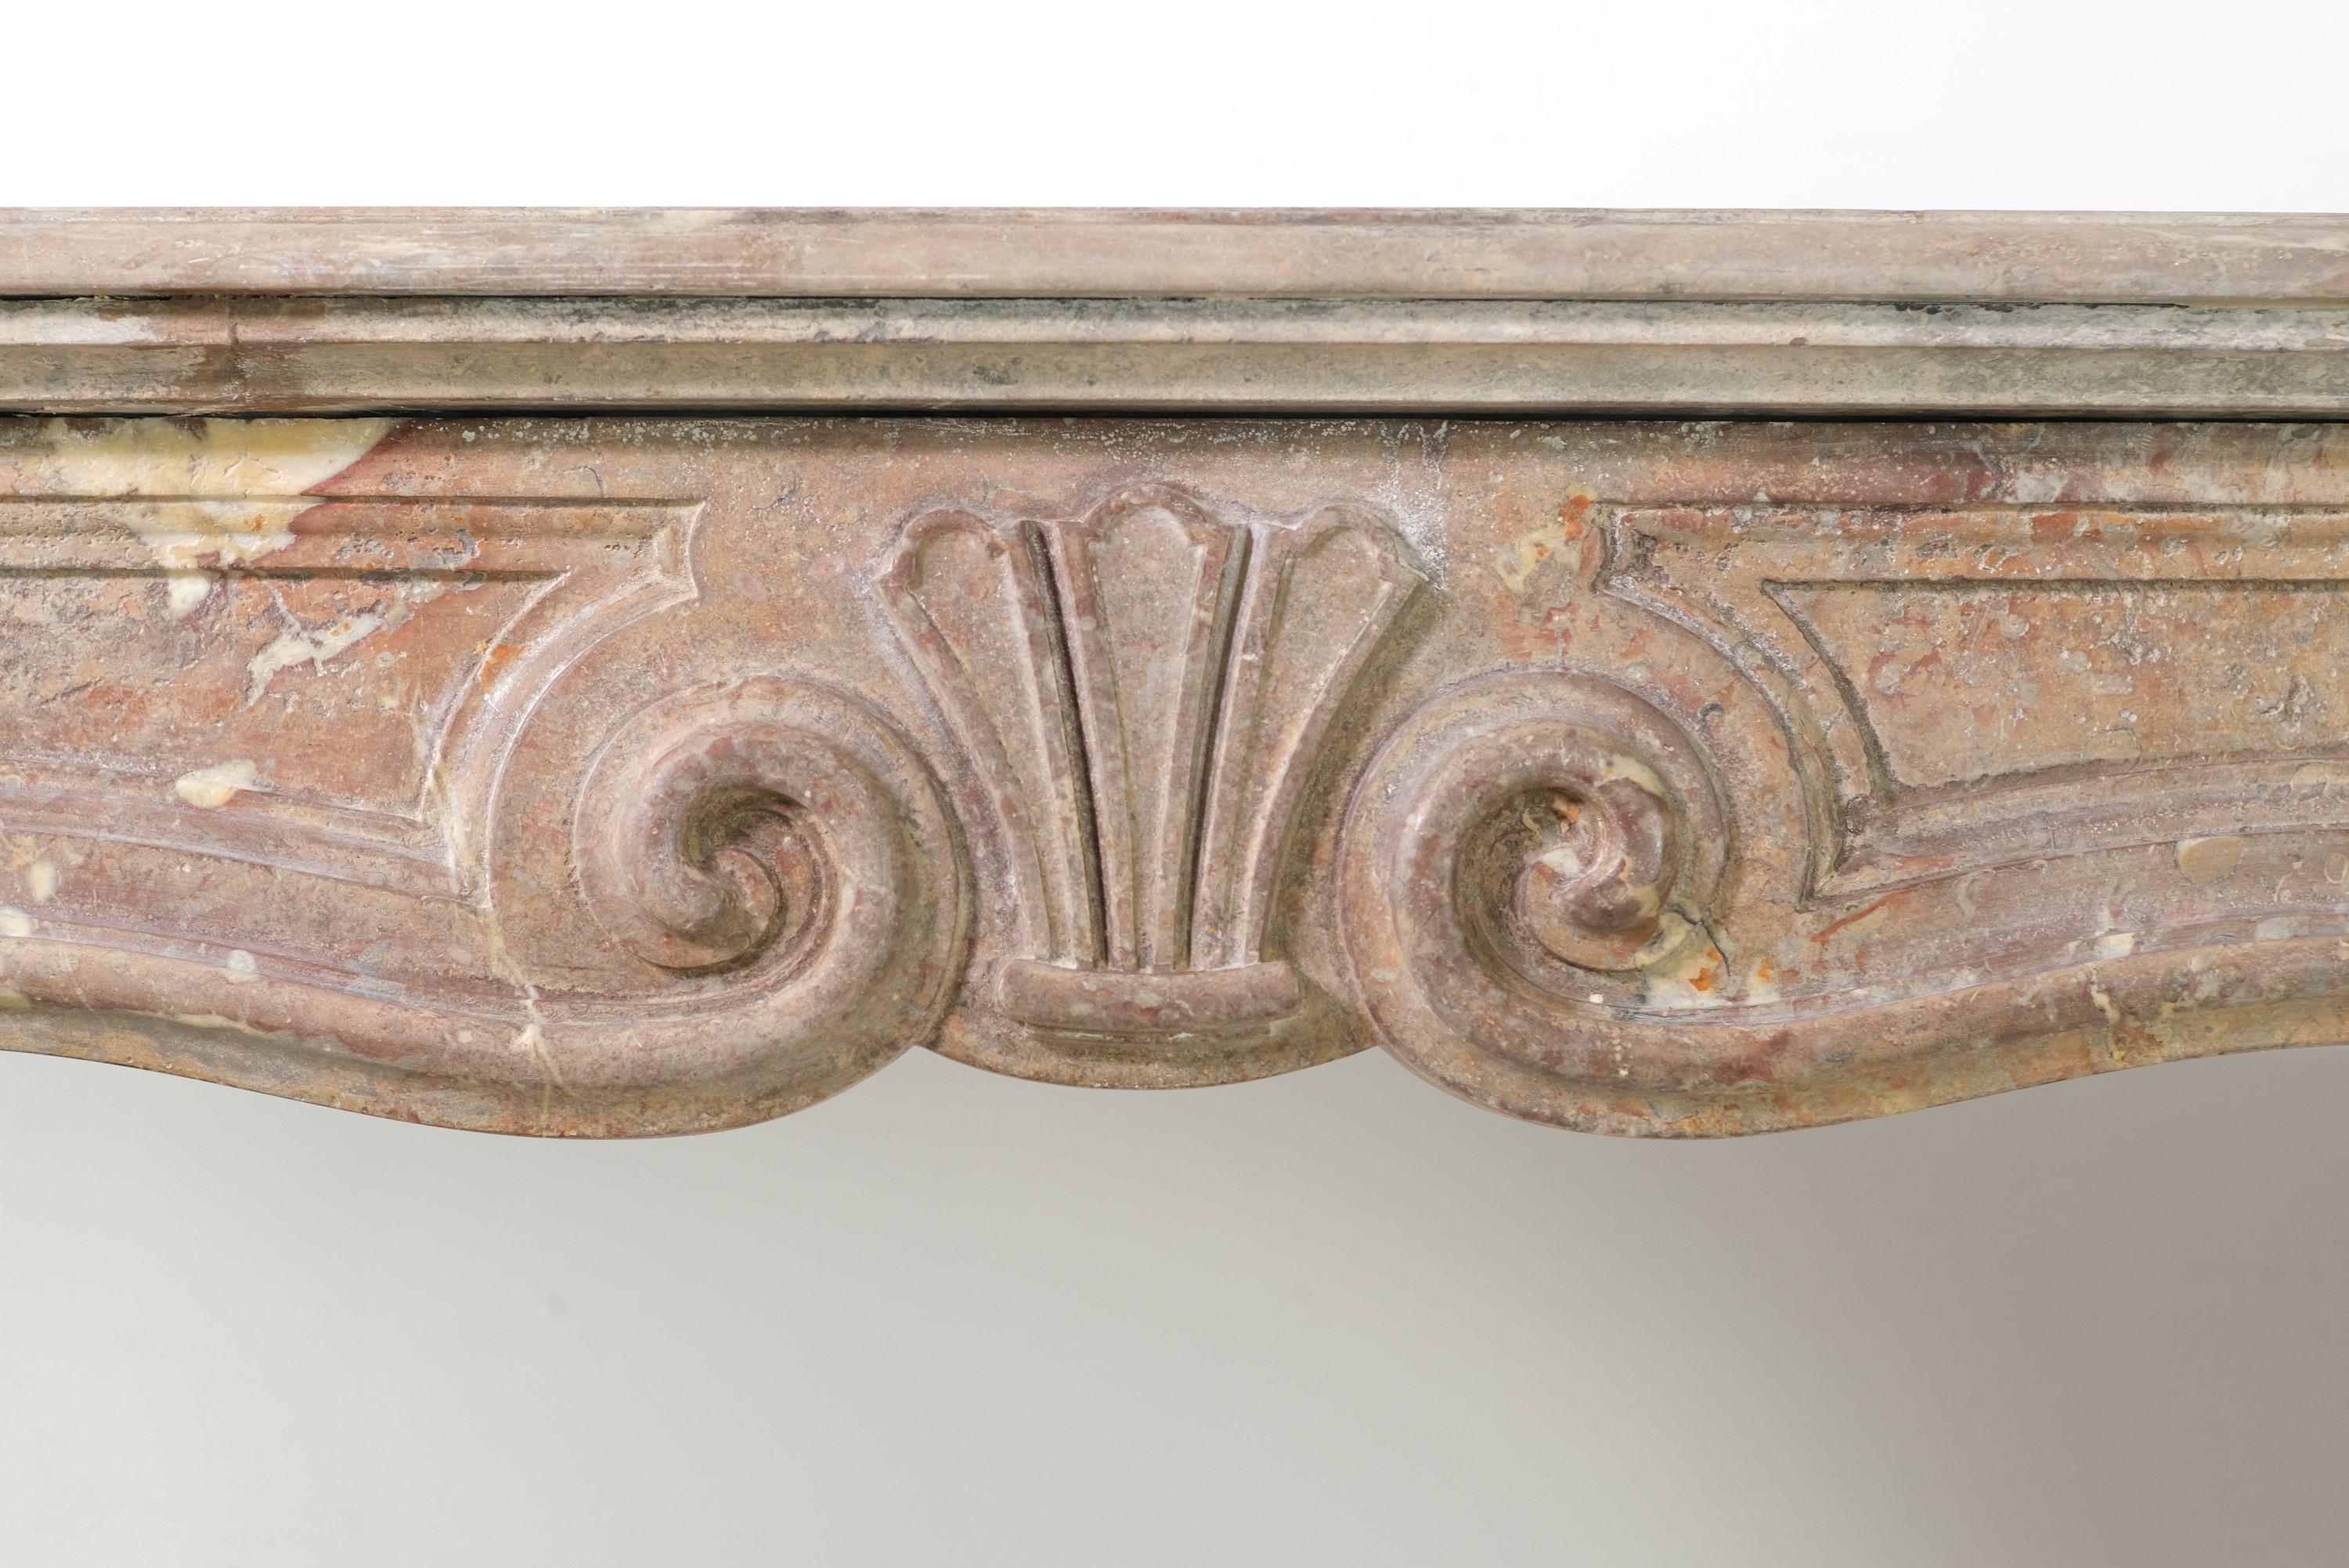 This mantel was recovered from a 1926 well heeled apartment at 950 5th Avenue and East 76th Street on the upper east side of NYC. Hand carved stone featuring various shades of tan, gray, brown, and white. Designed with a scrolled center shell on the